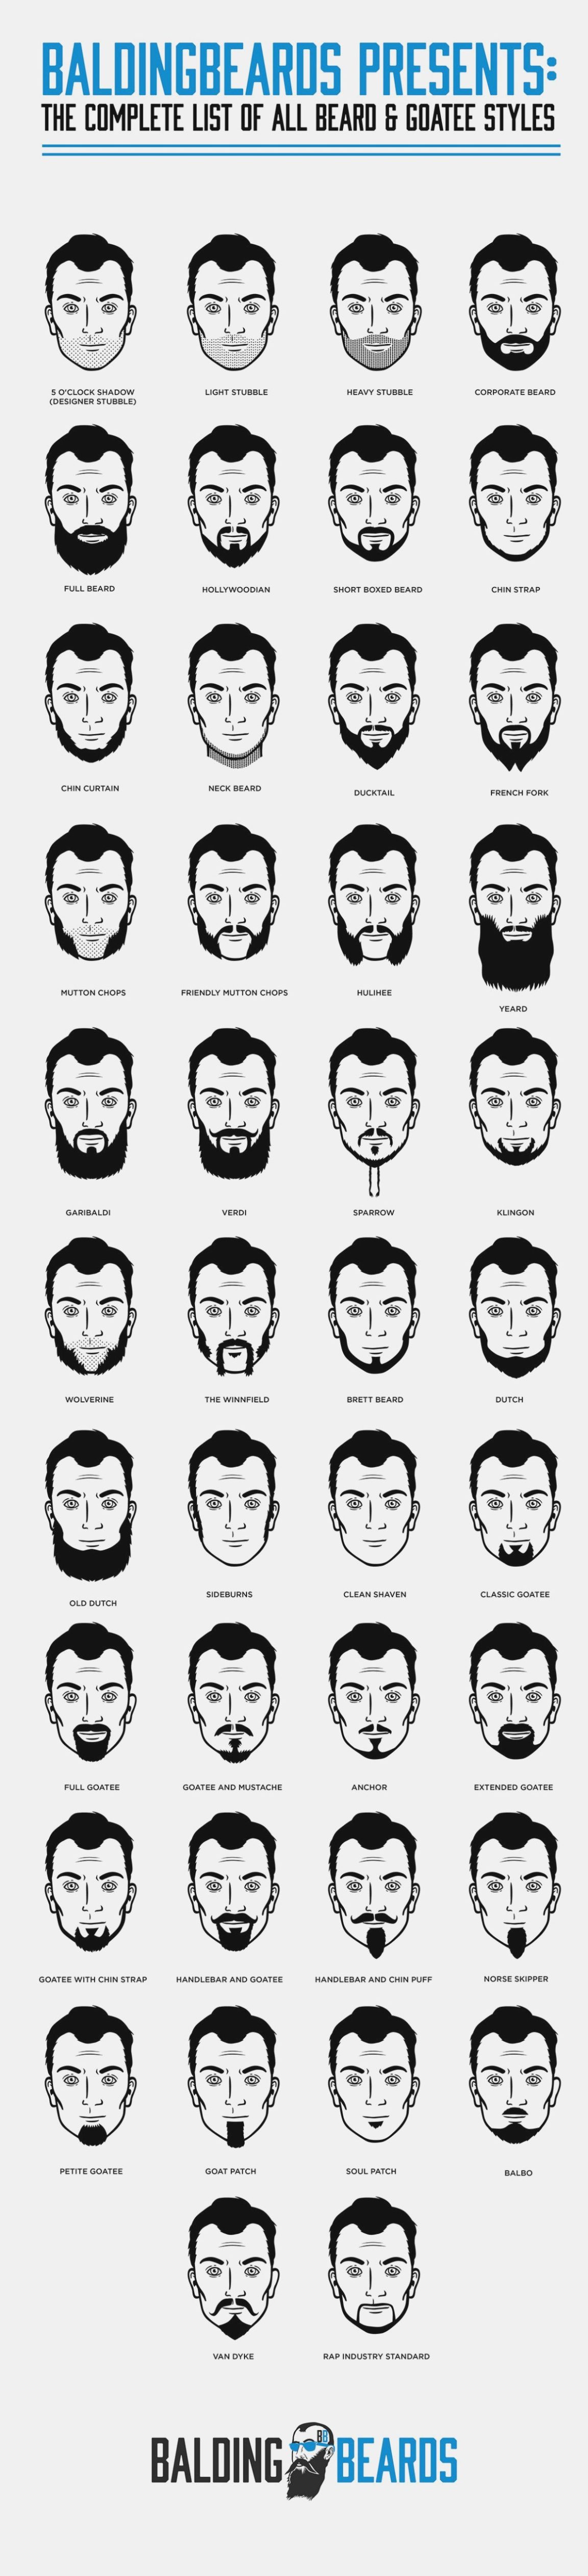 Visual Guide to different beard styles for men Infographic.tv